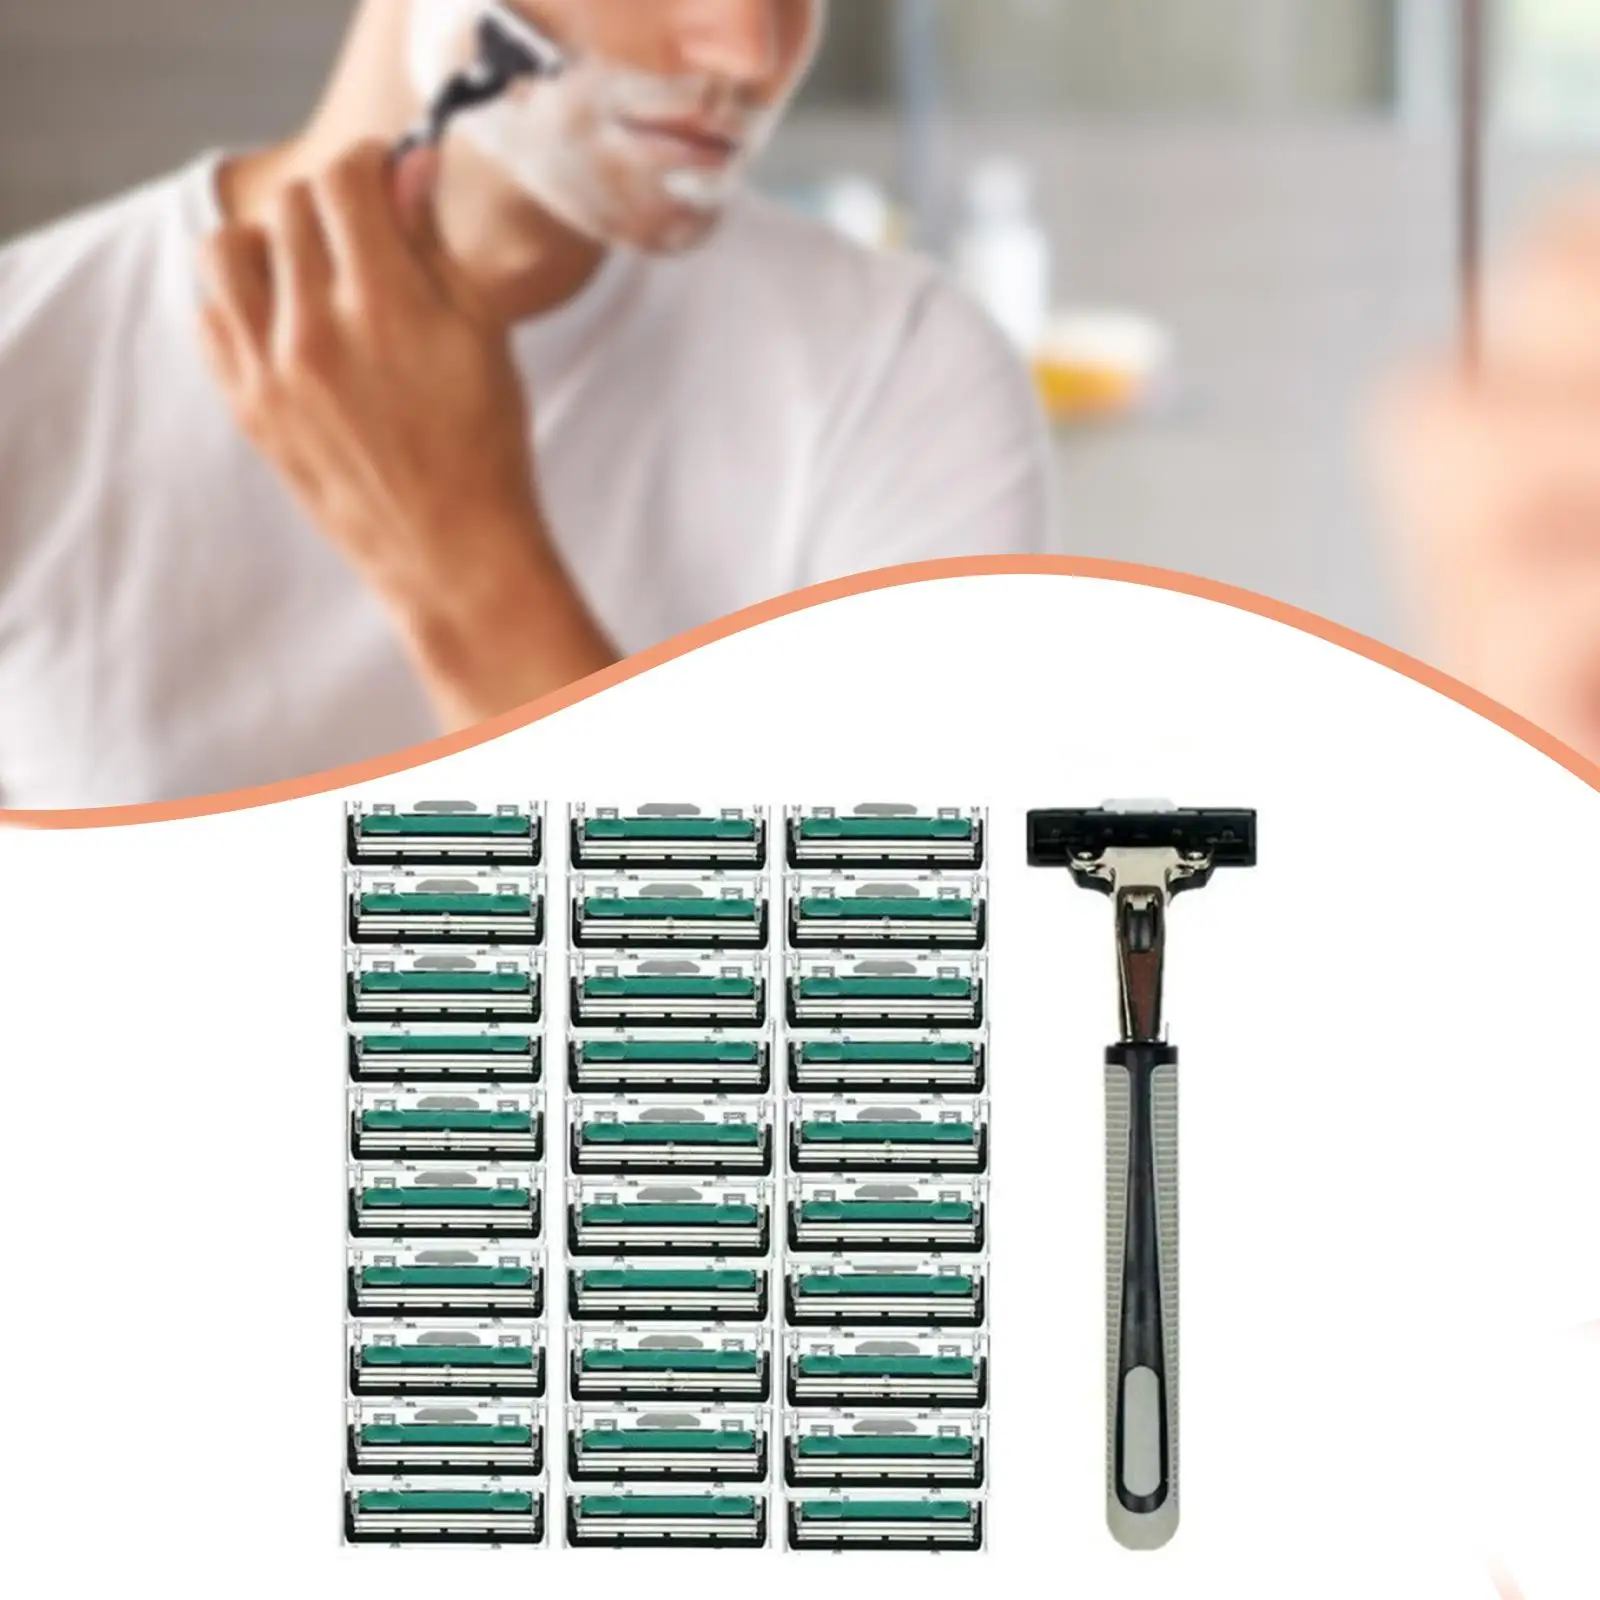 Manual Double Edge Shaver Face Shaver Reusable Grooming Anti Slip Handle for